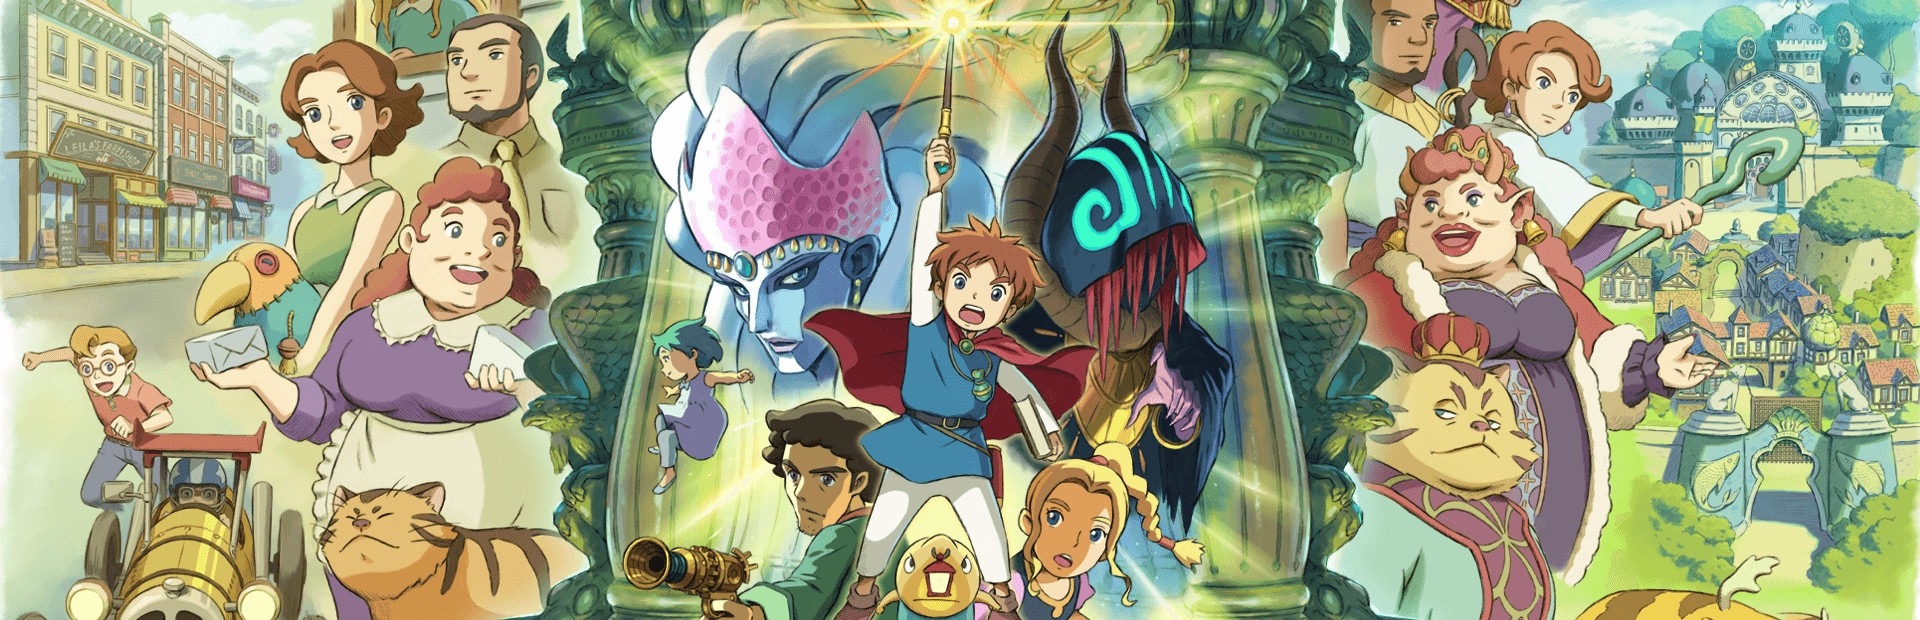 Ni No Kuni Remastered: Wrath of the White Witch - Switch